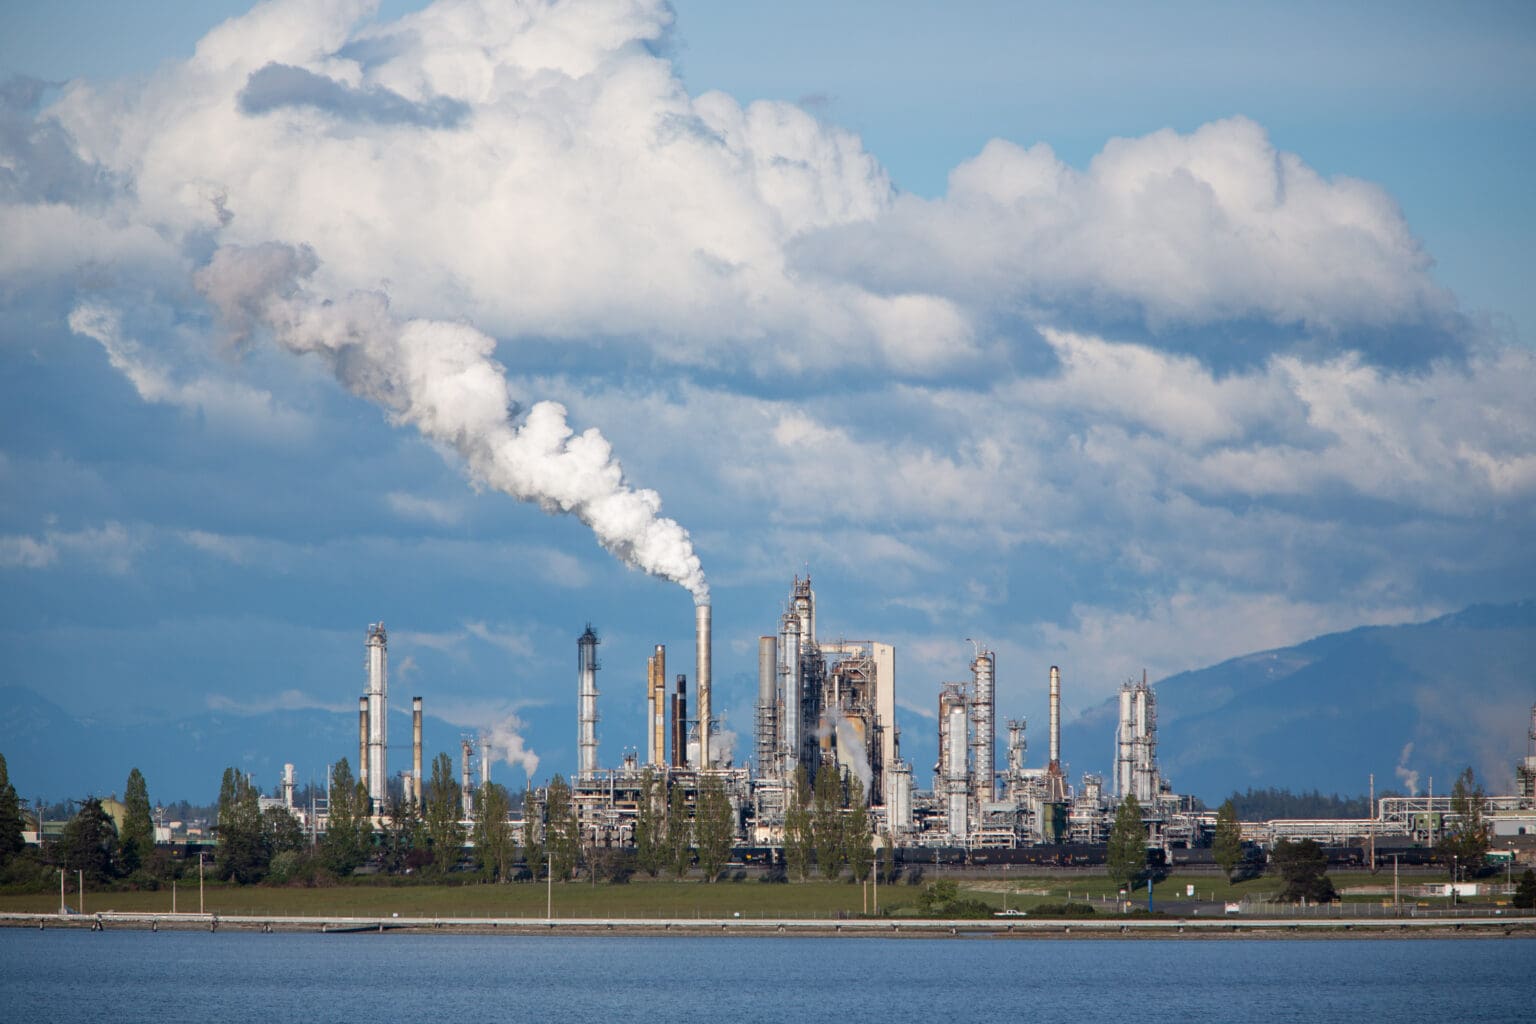 The Anacortes Marathon Refinery is one of five refineries in Washington State facing increased safety regulations